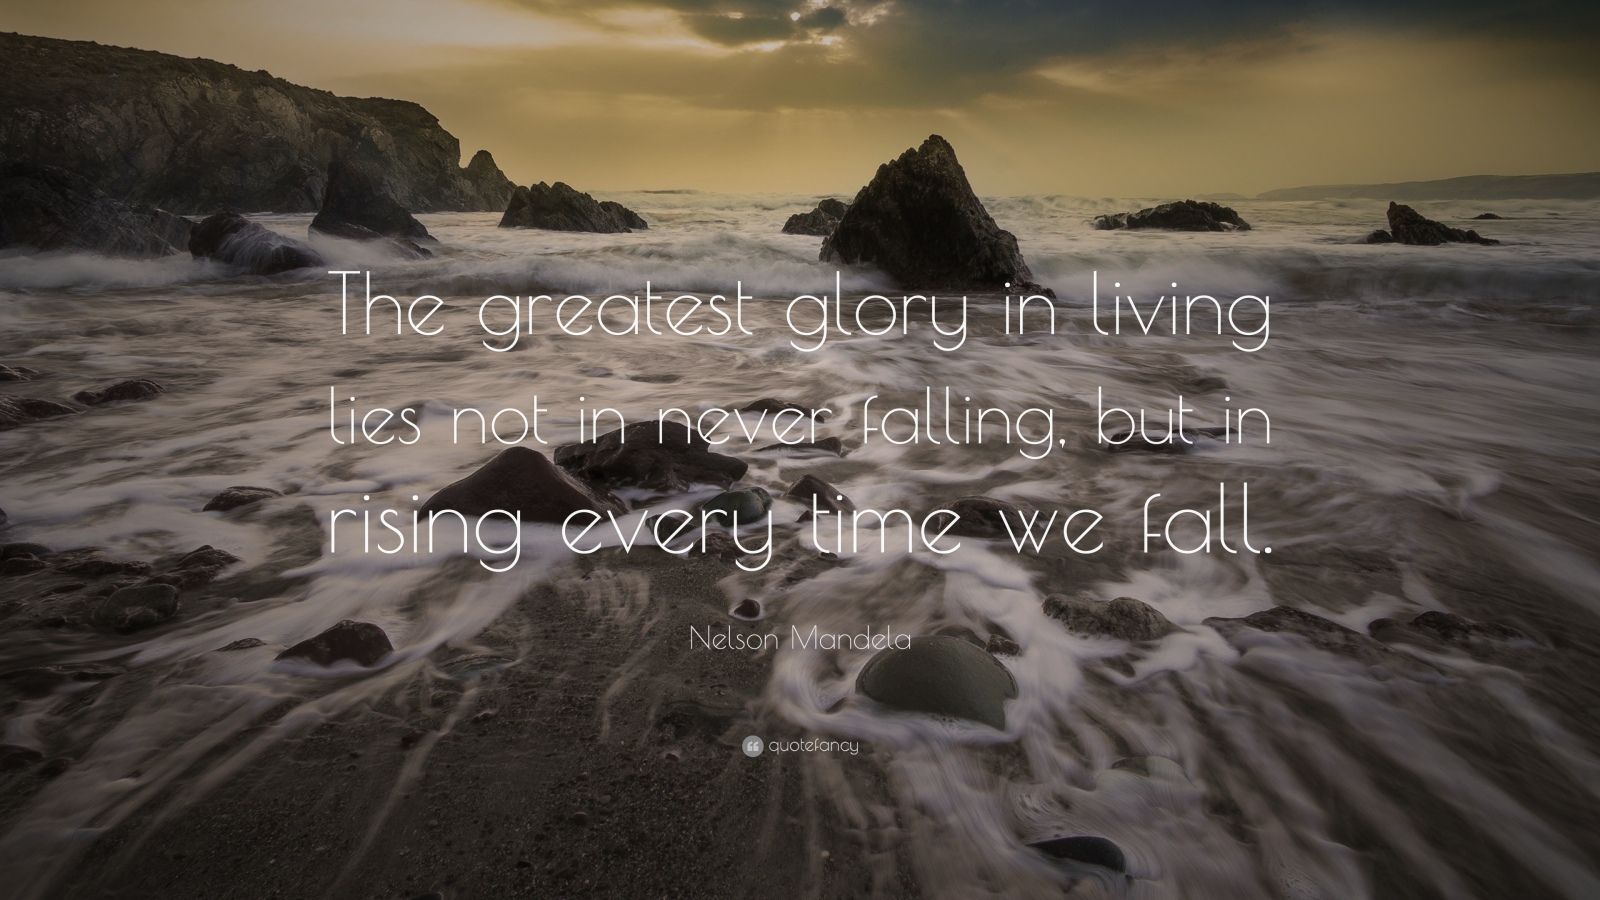 Nelson Mandela Quote: “The greatest glory in living lies not in never